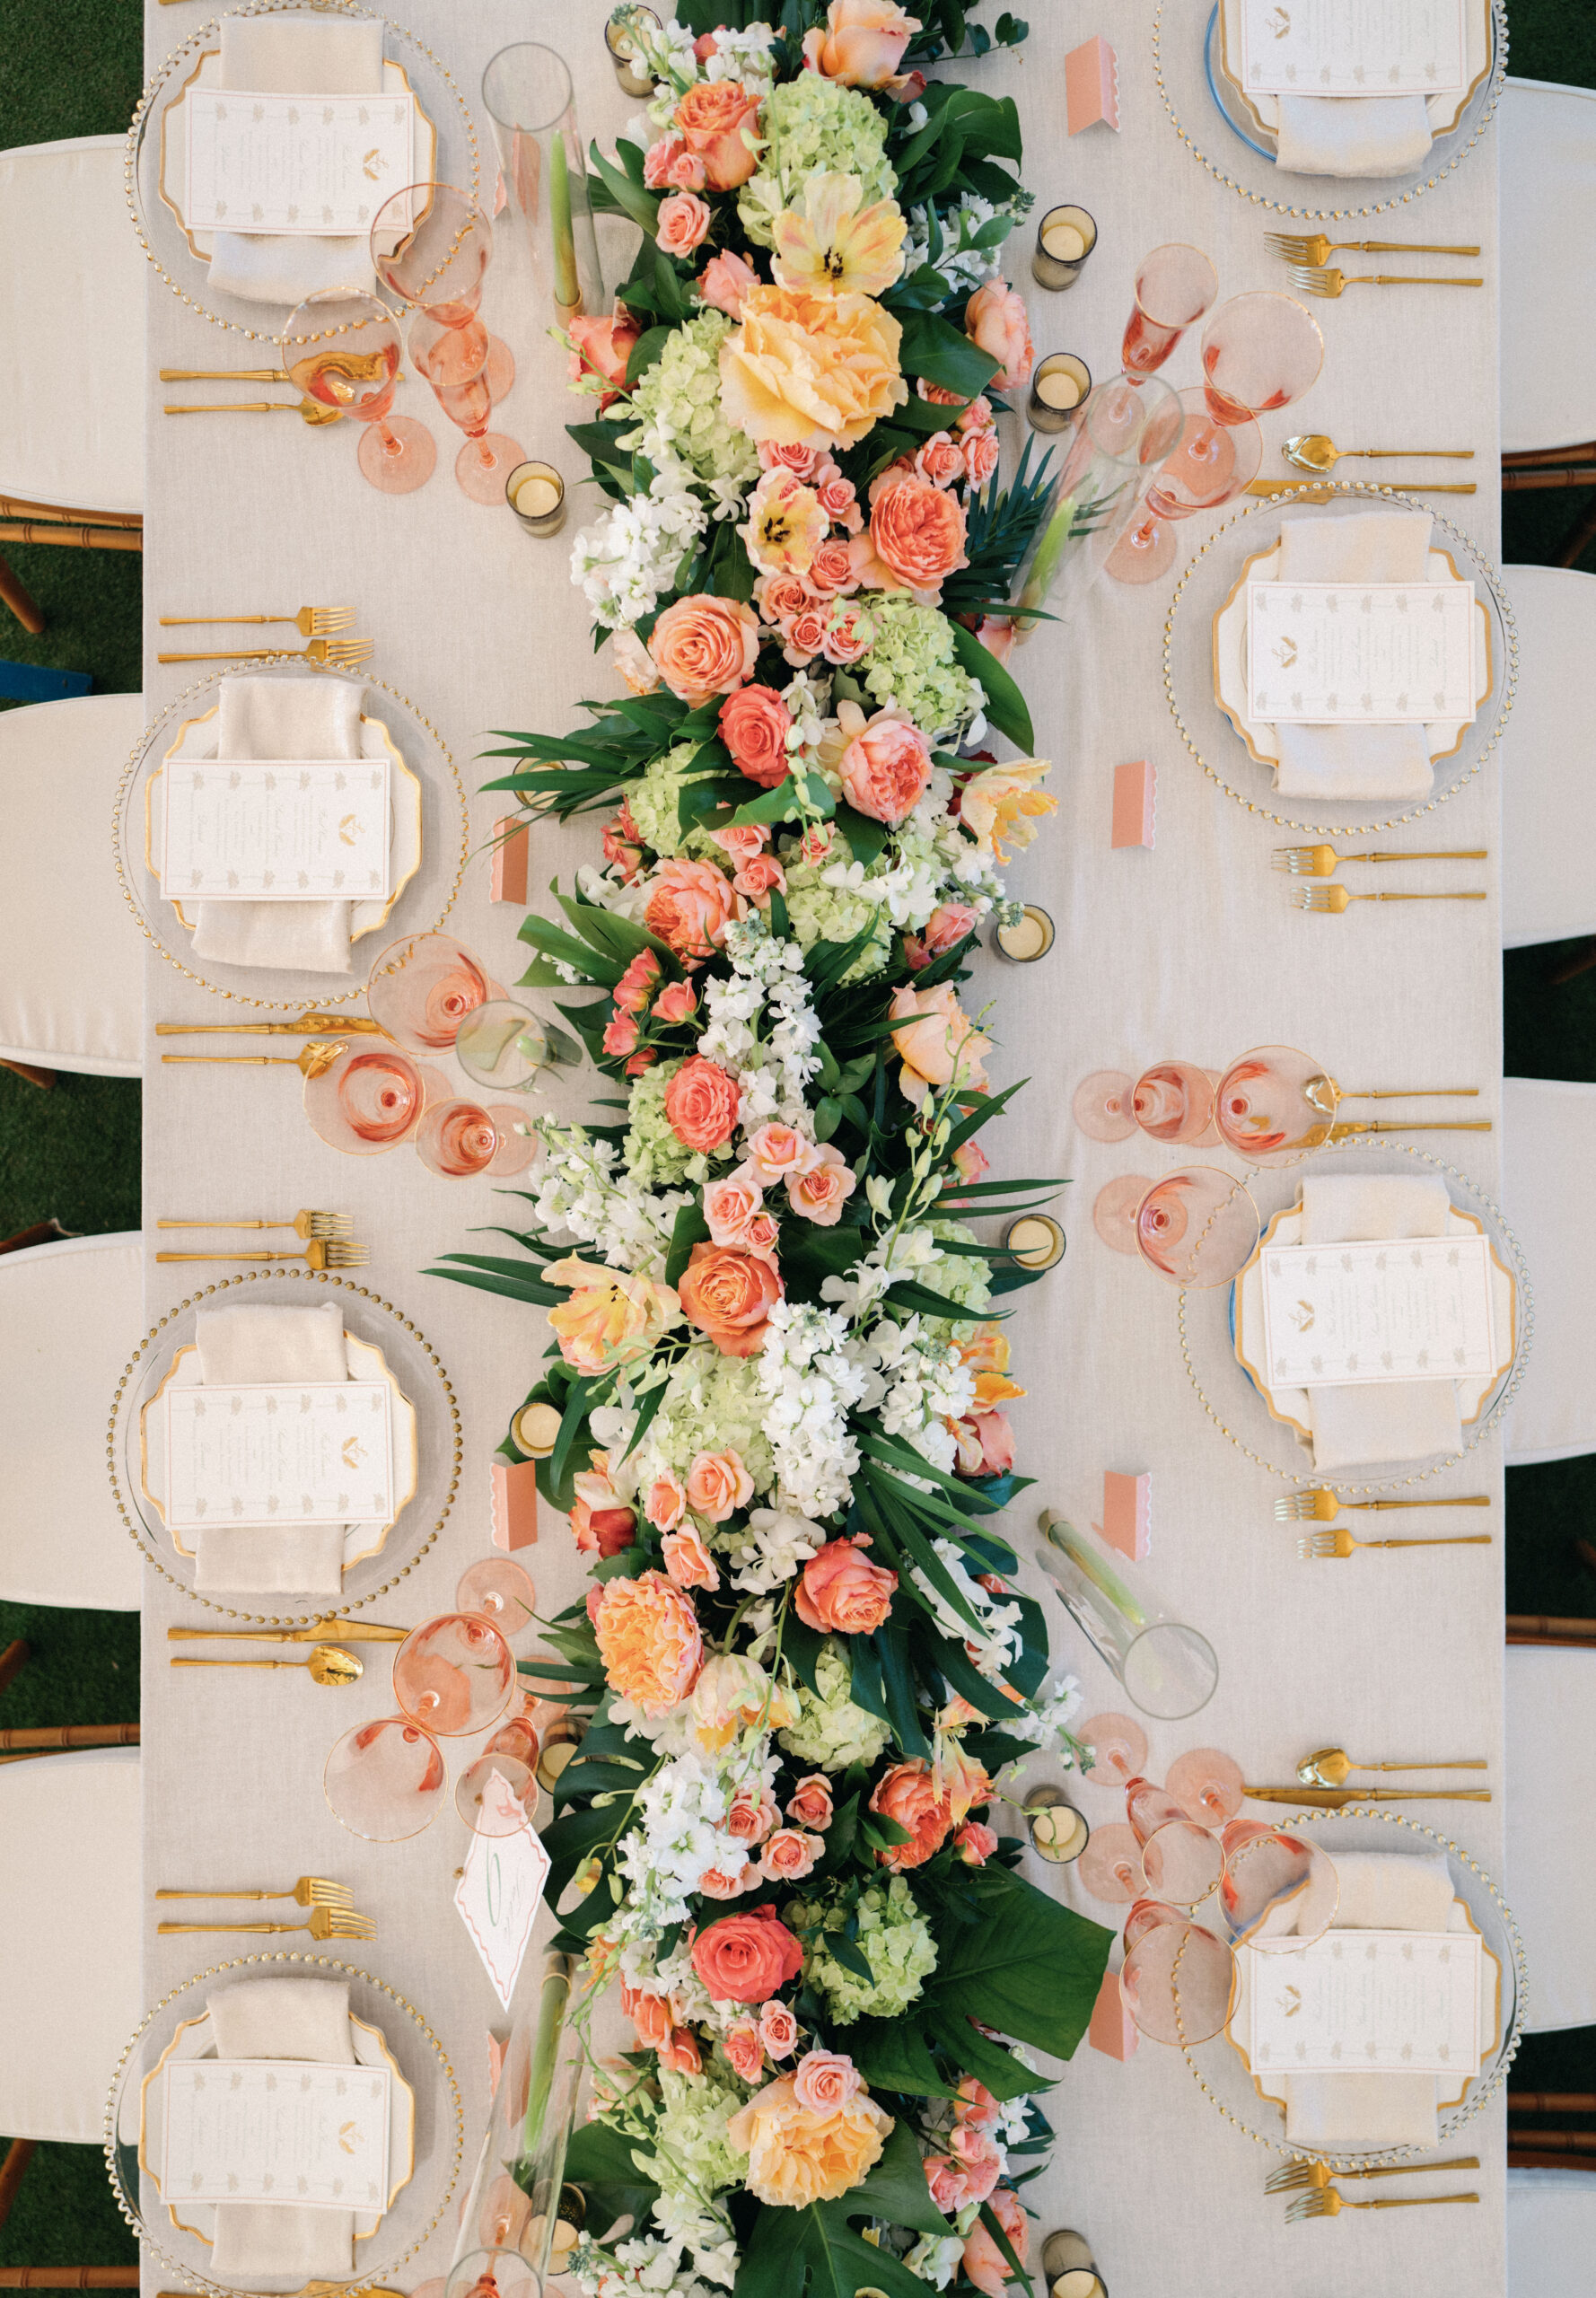 wide, top down tabletop view of floral garland in peach, coral and green